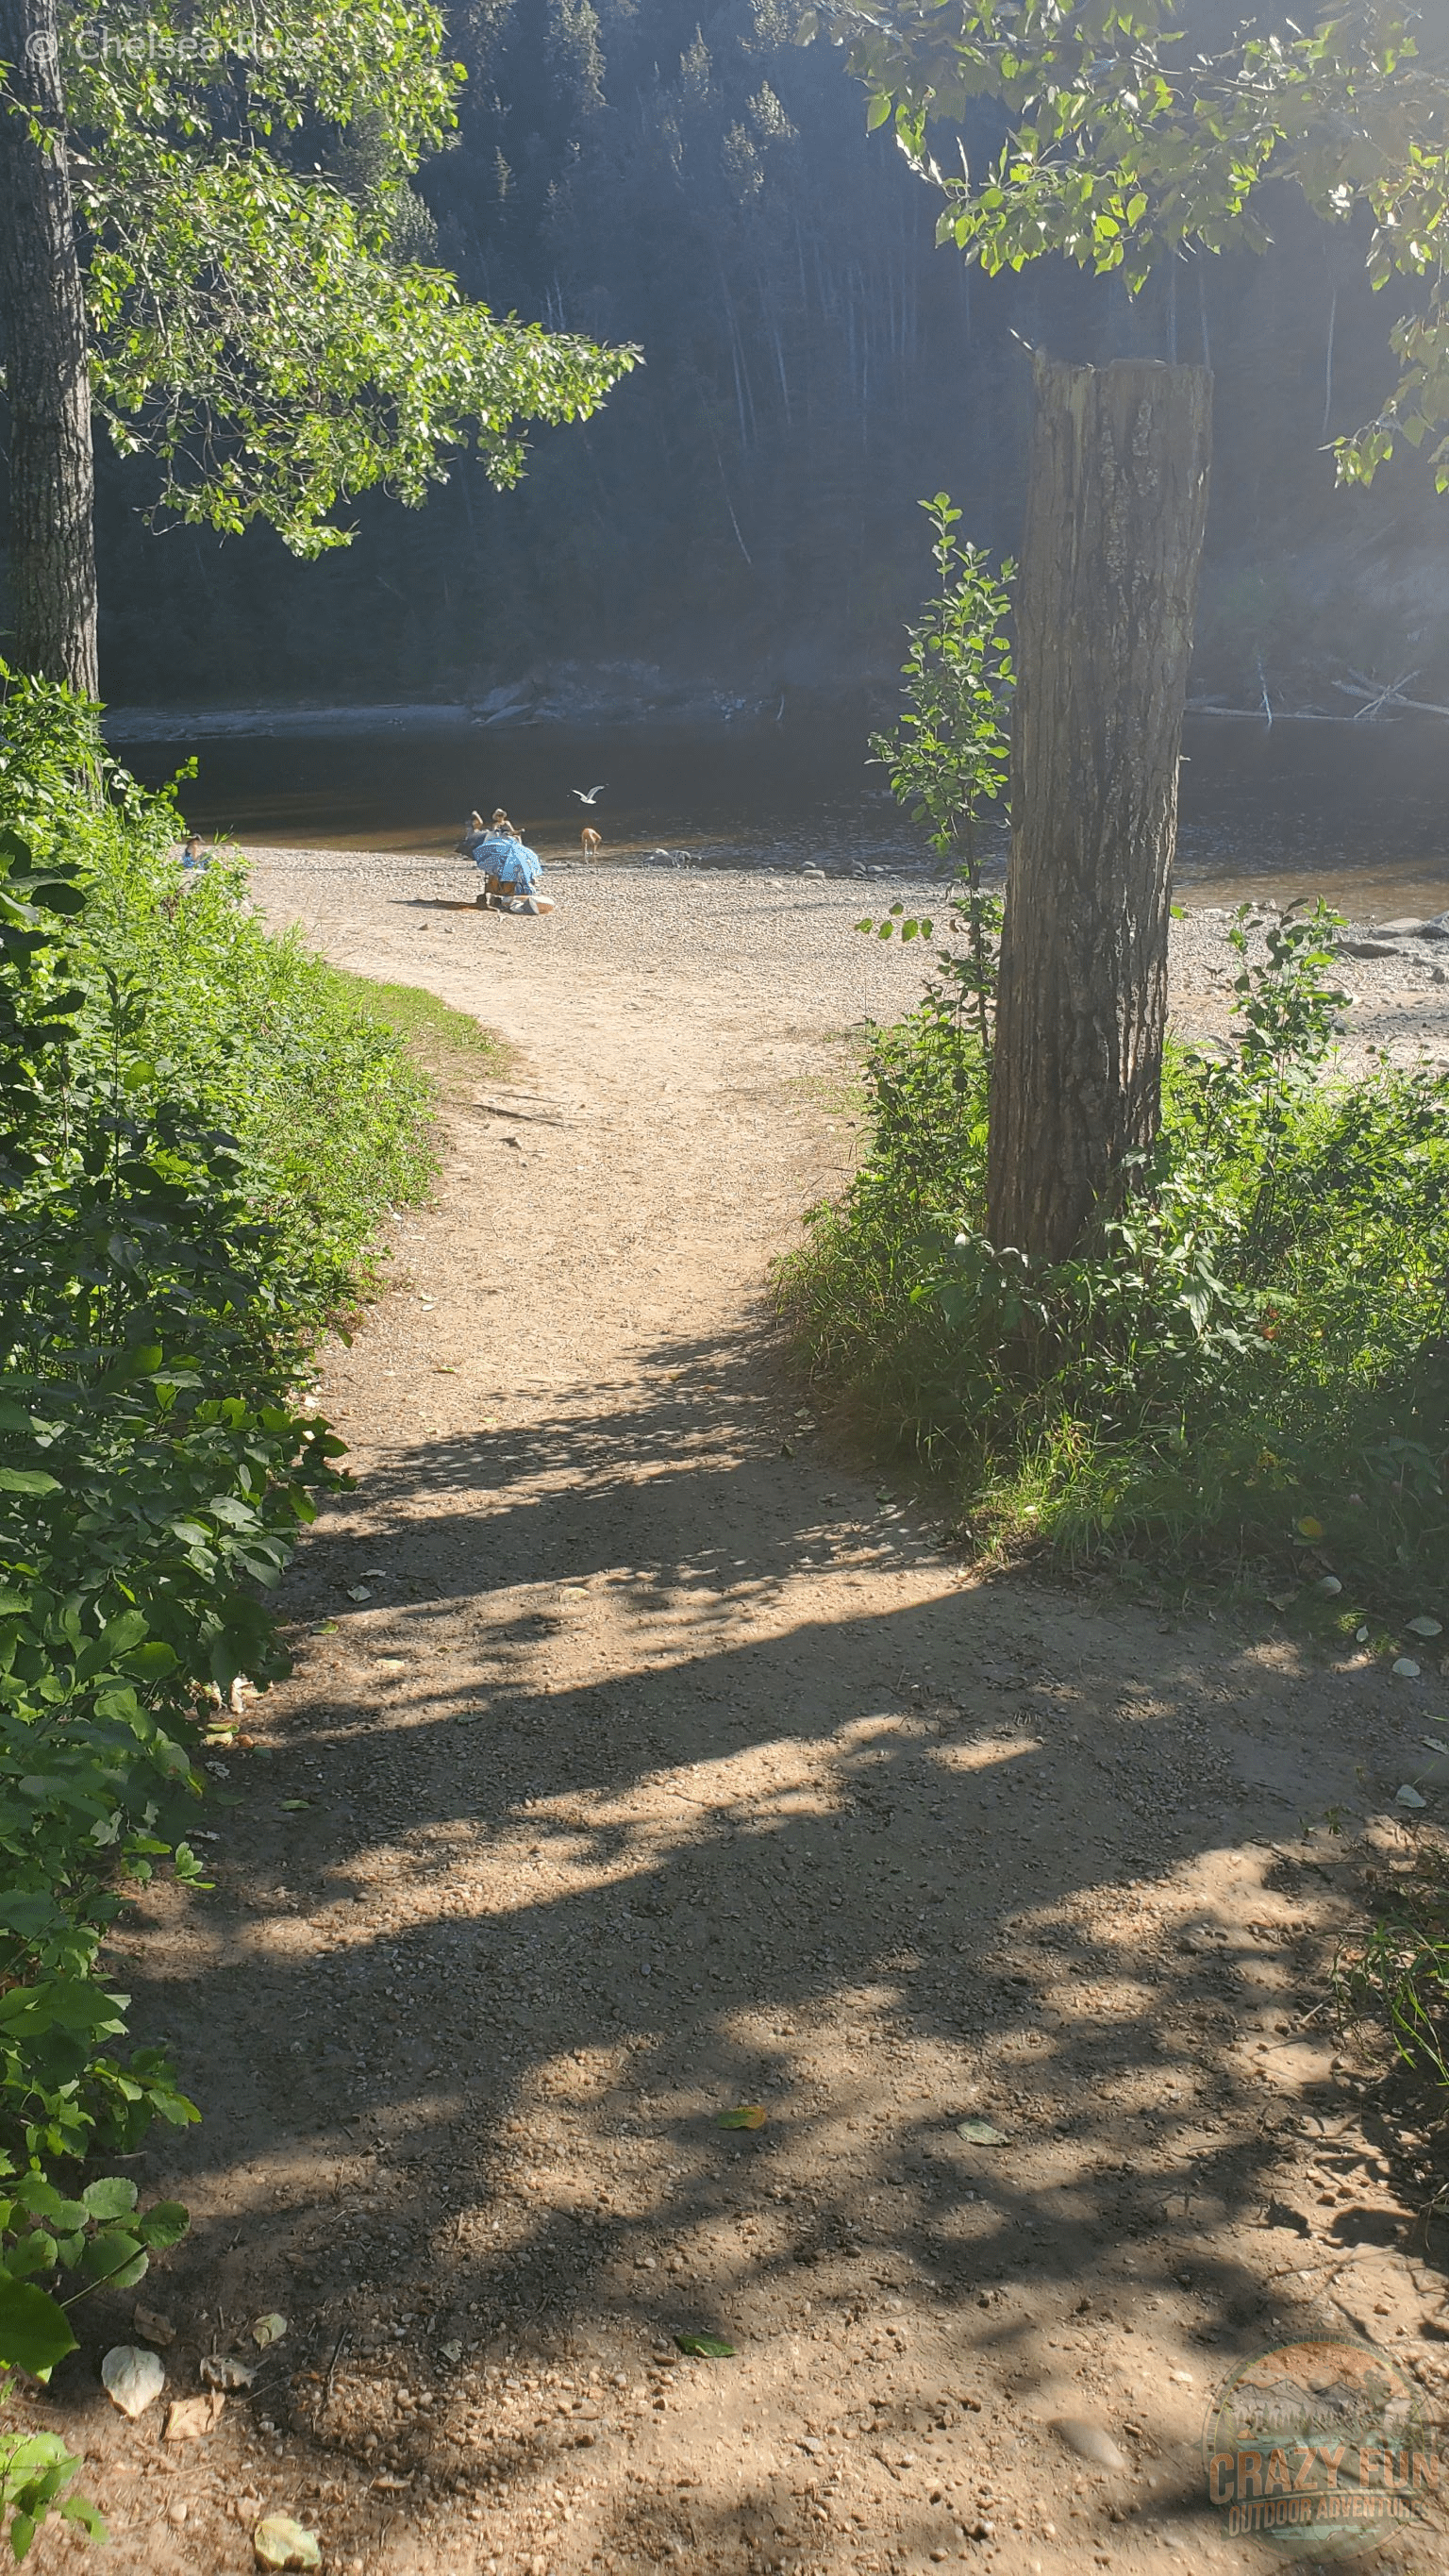 The path showing the direction to the river.